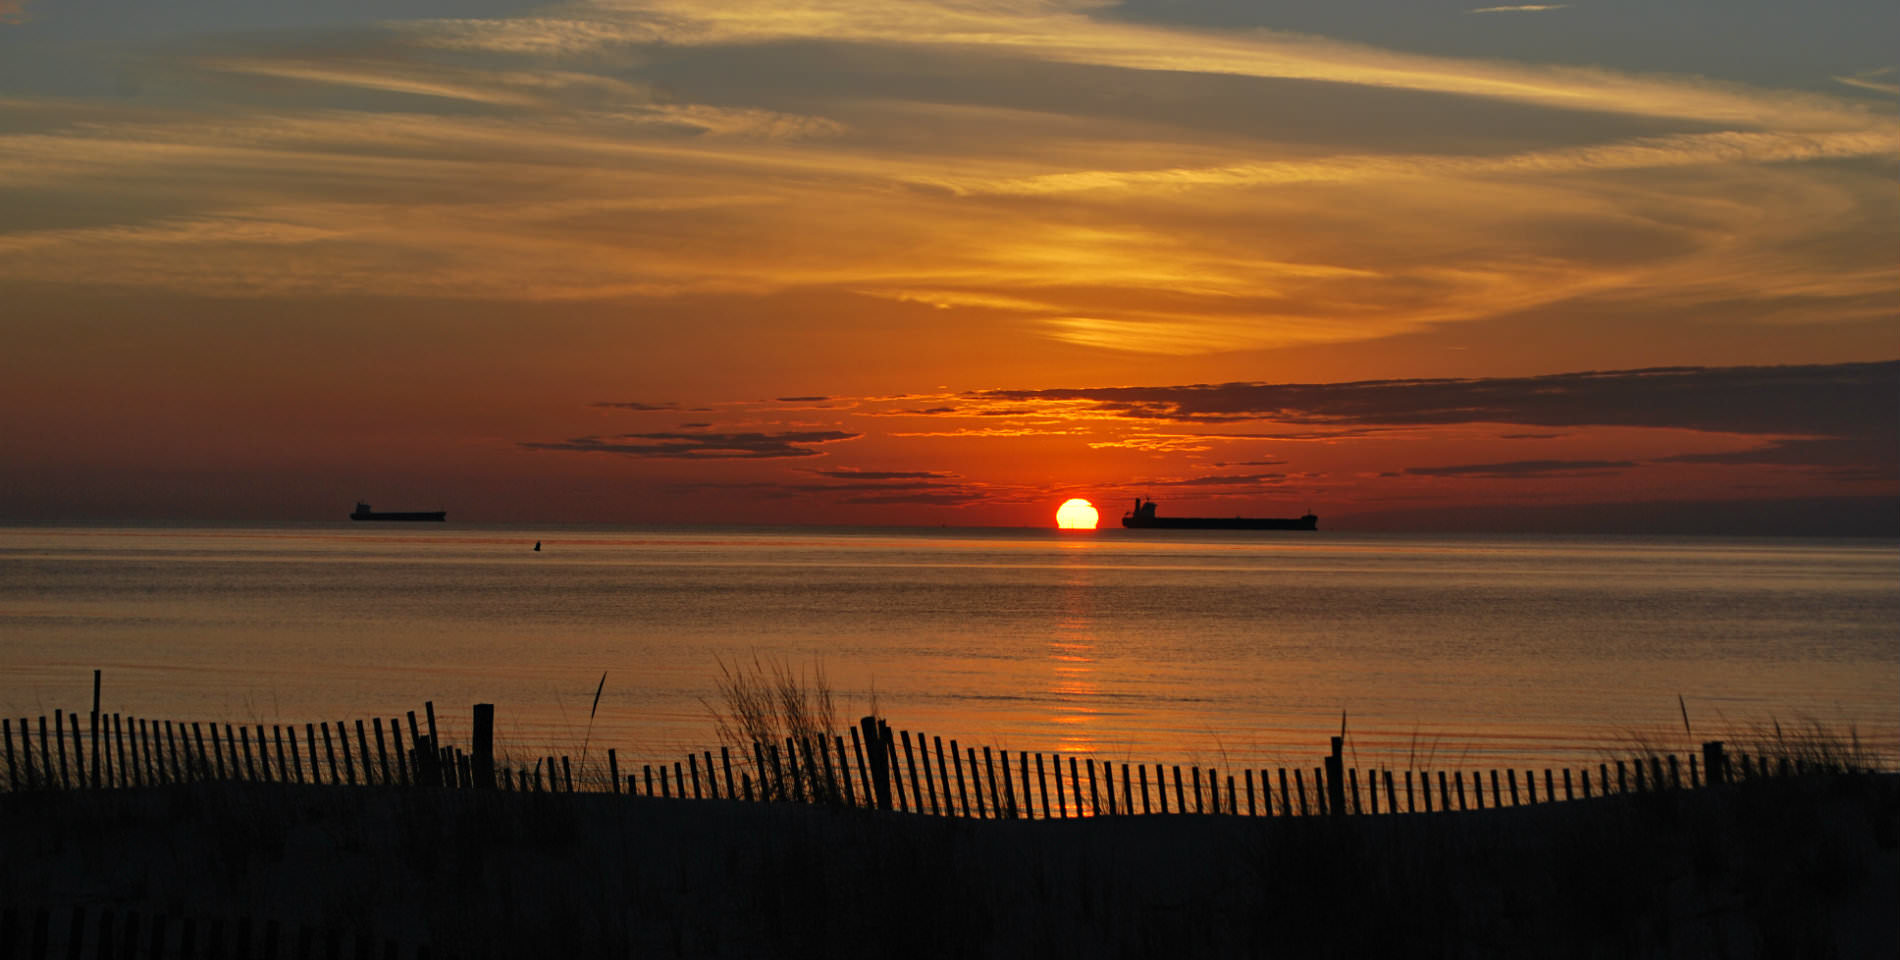 A silhouetted oil tanker floats in the Bay with a warm, red and gold sunset in the background.